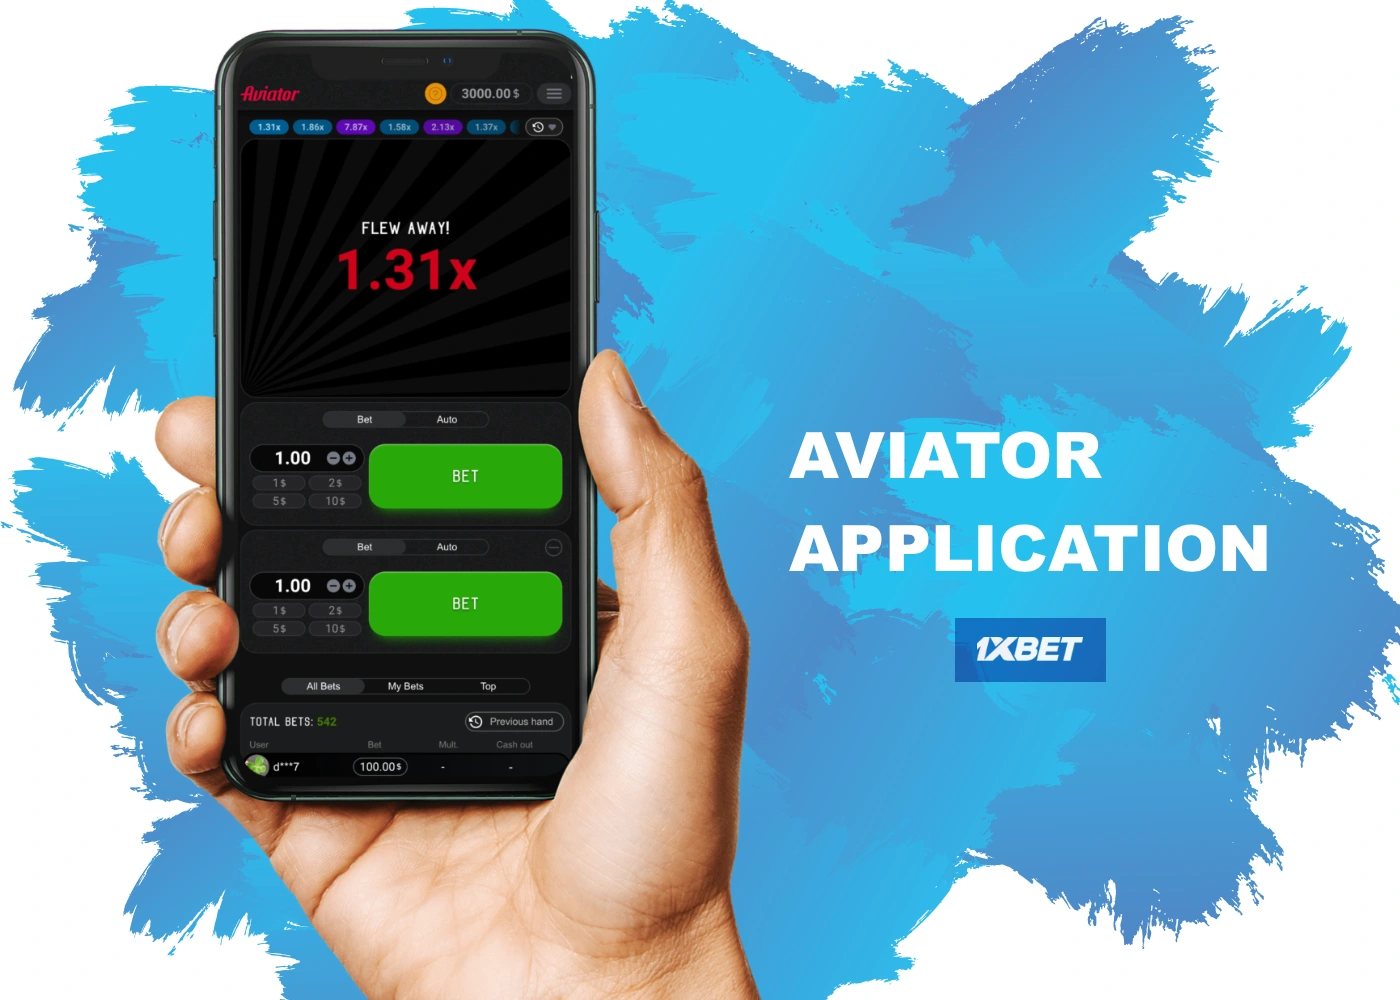 Free mobile app 1xBet Aviator allows you to play anytime, anywhere